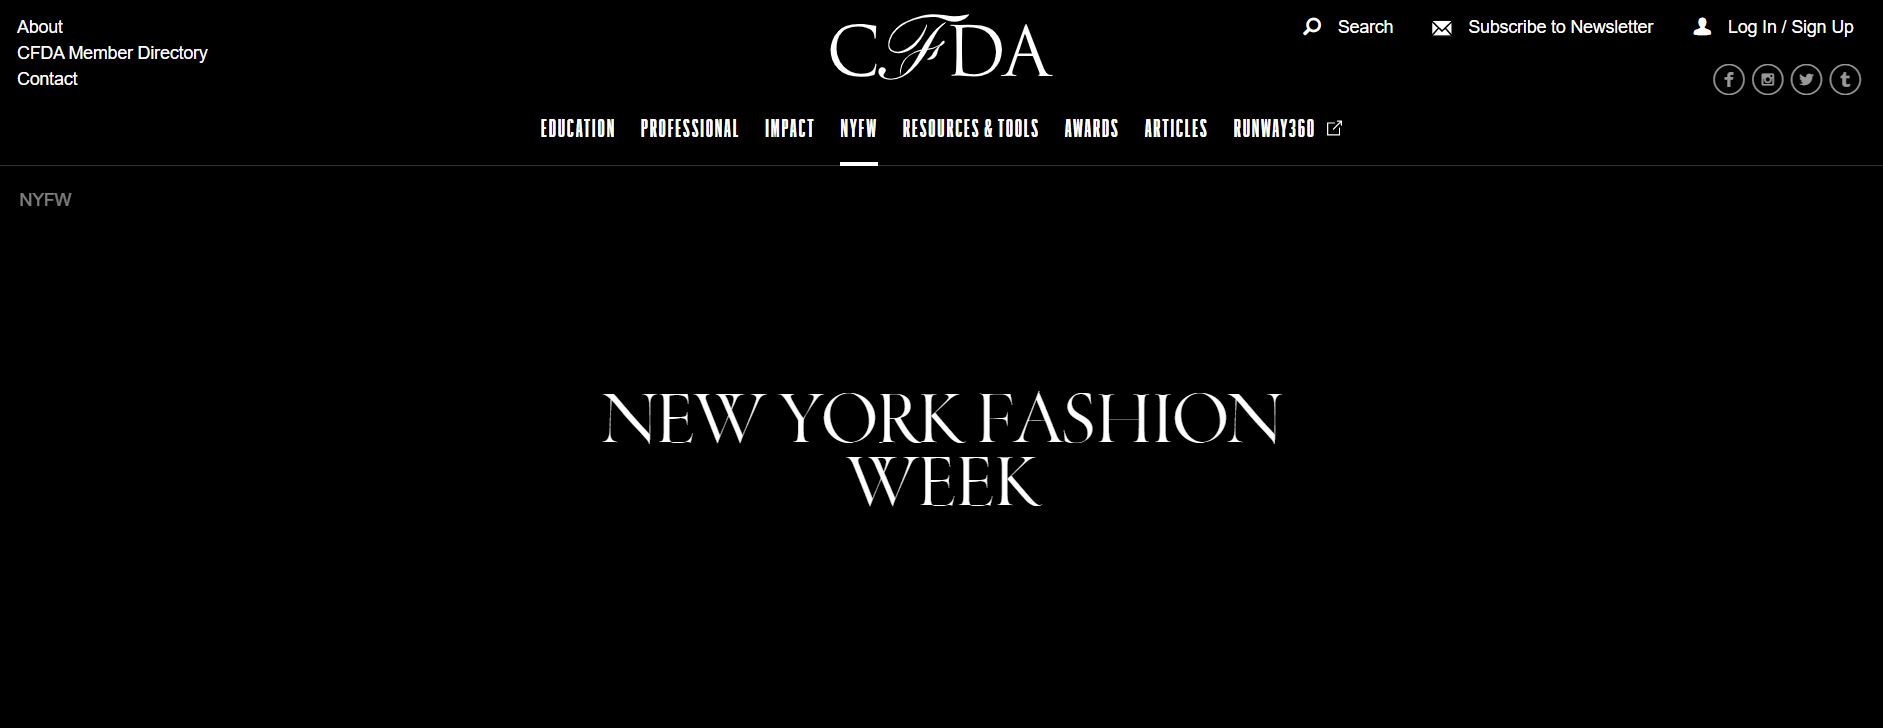 New York Fashion Week Announced Preliminary Schedule, 10 Chinese Designer Brands Will Be Participating